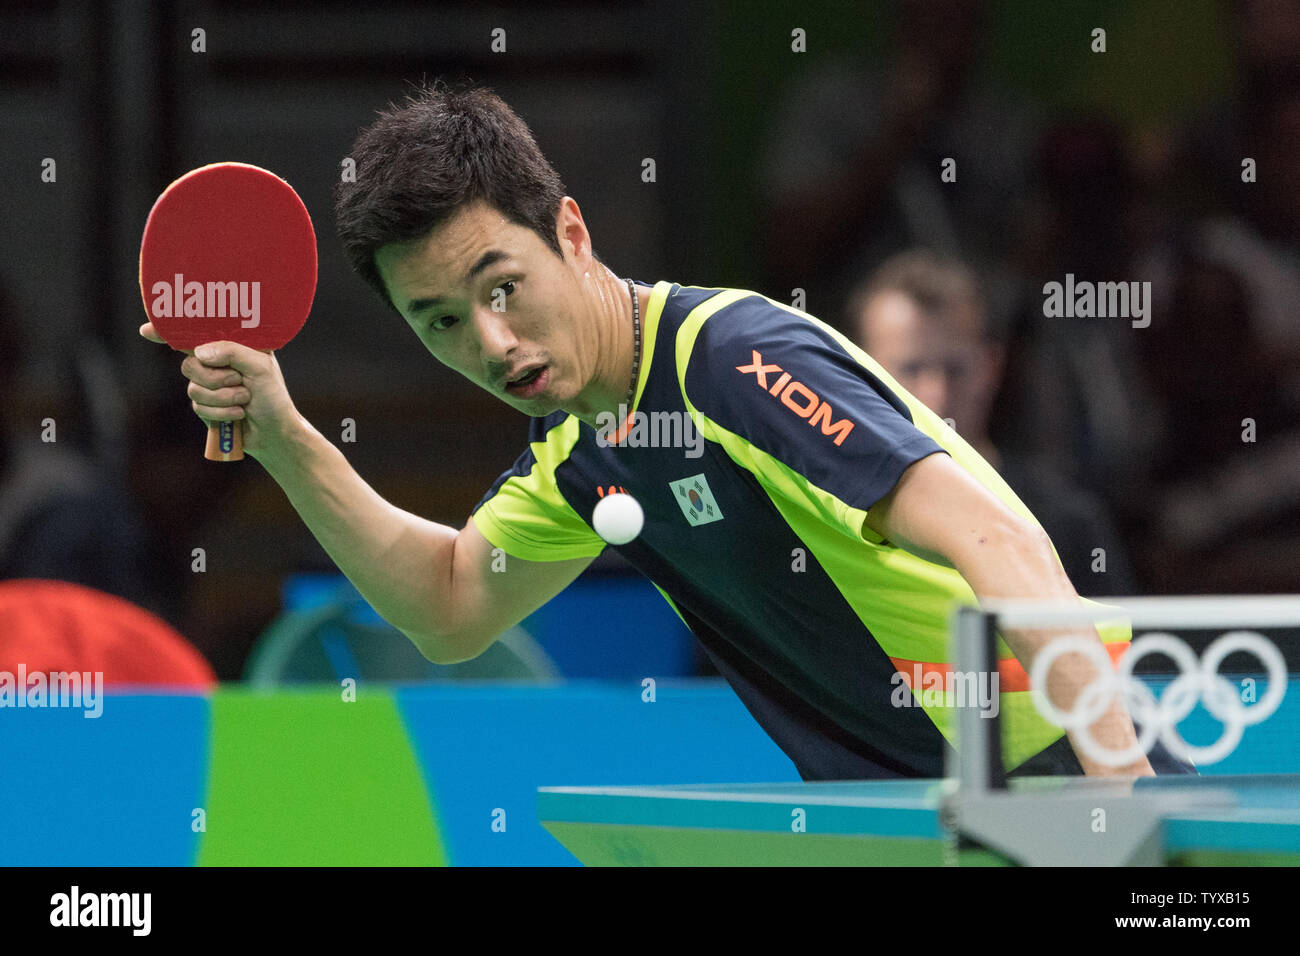 Saehyuk Joo of South Korea during the Men's Team Table Tennis bronze medal match against Germany in Riocentro Pavilion 3 at the 2016 Rio Summer Olympics in Rio de Janeiro, Brazil, on August 1, 2016.      Photo by Richard Ellis/UPI Stock Photo